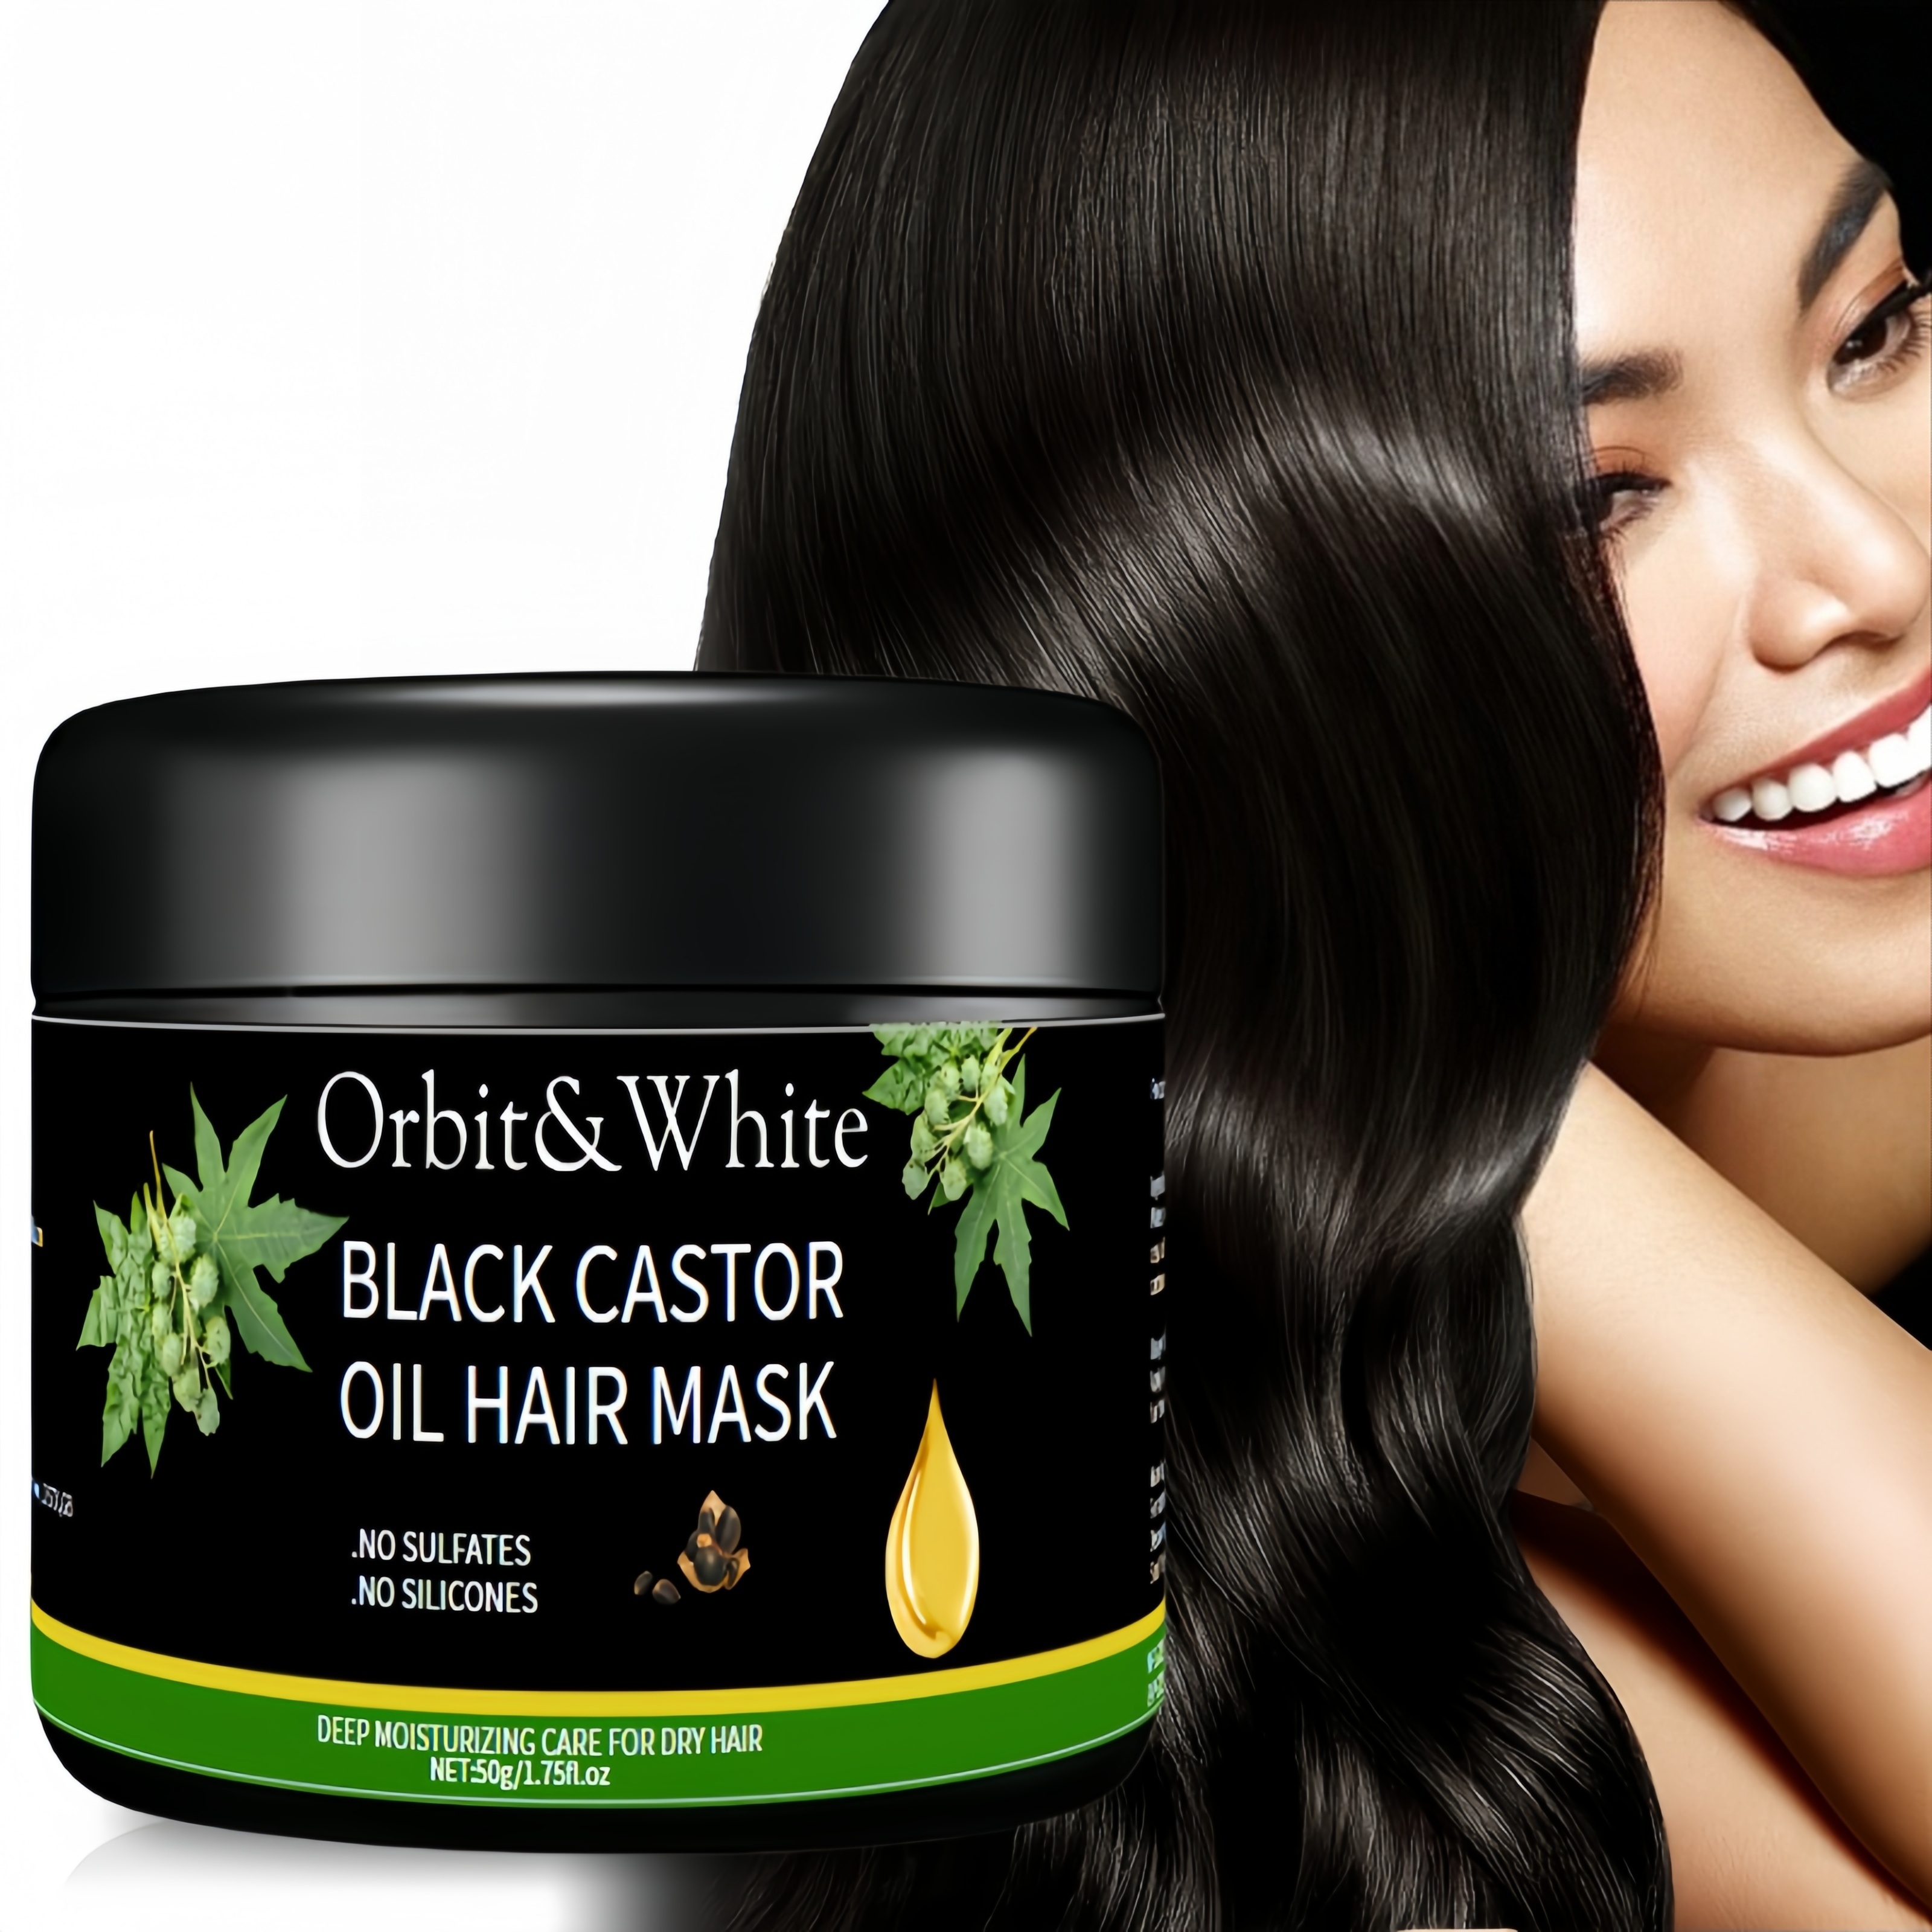 

Black Castor Oil Hair Mask, Containing Black Castor Oil Extract, Smoothing, Refreshing And Moisturizing Hair, Suitable For All Hair Types